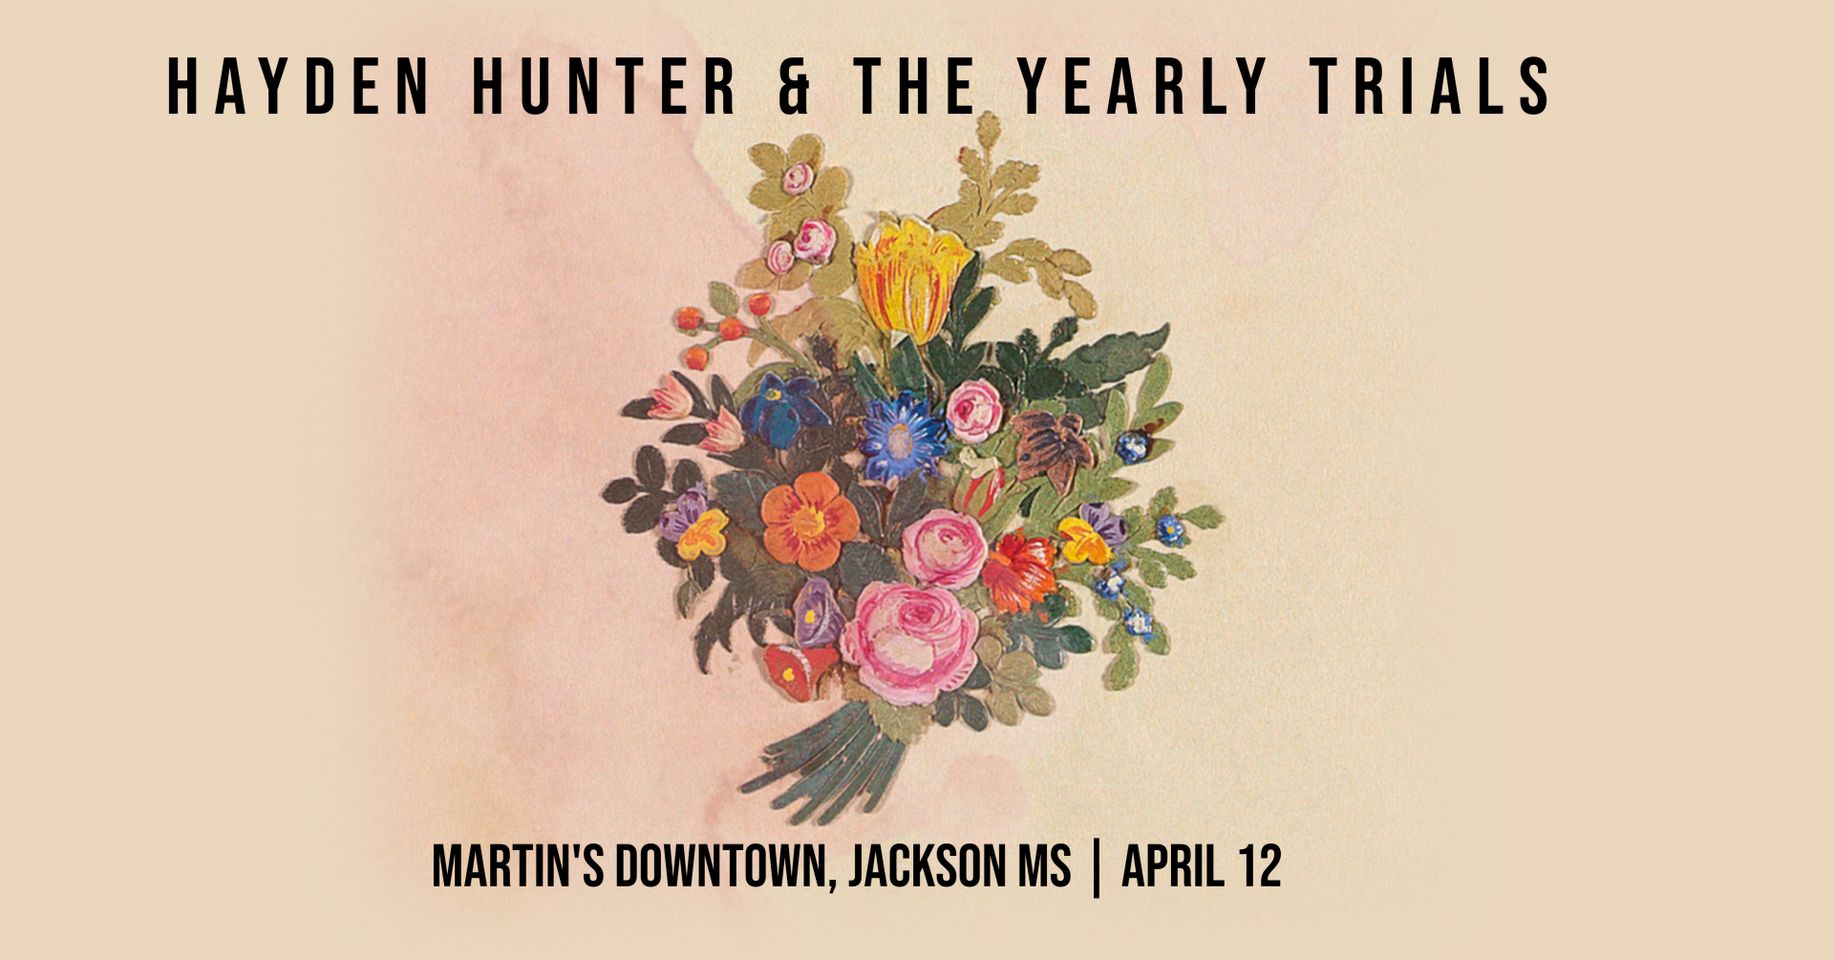 Hayden Hunter & The Yearly Trials live at Martin’s Downtown